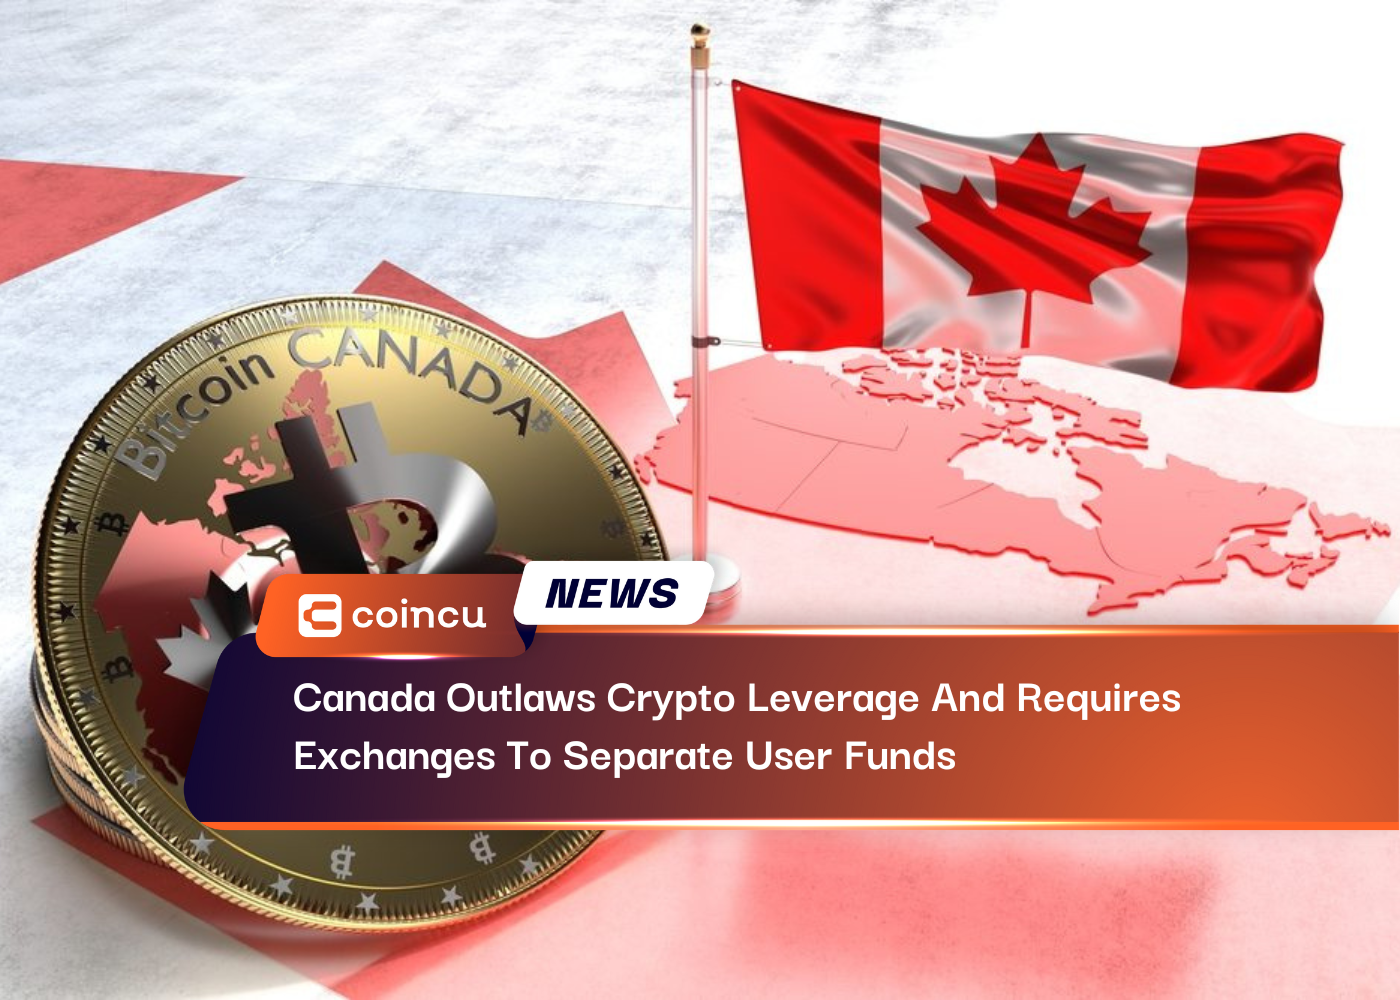 Canada Outlaws Crypto Leverage And Requires